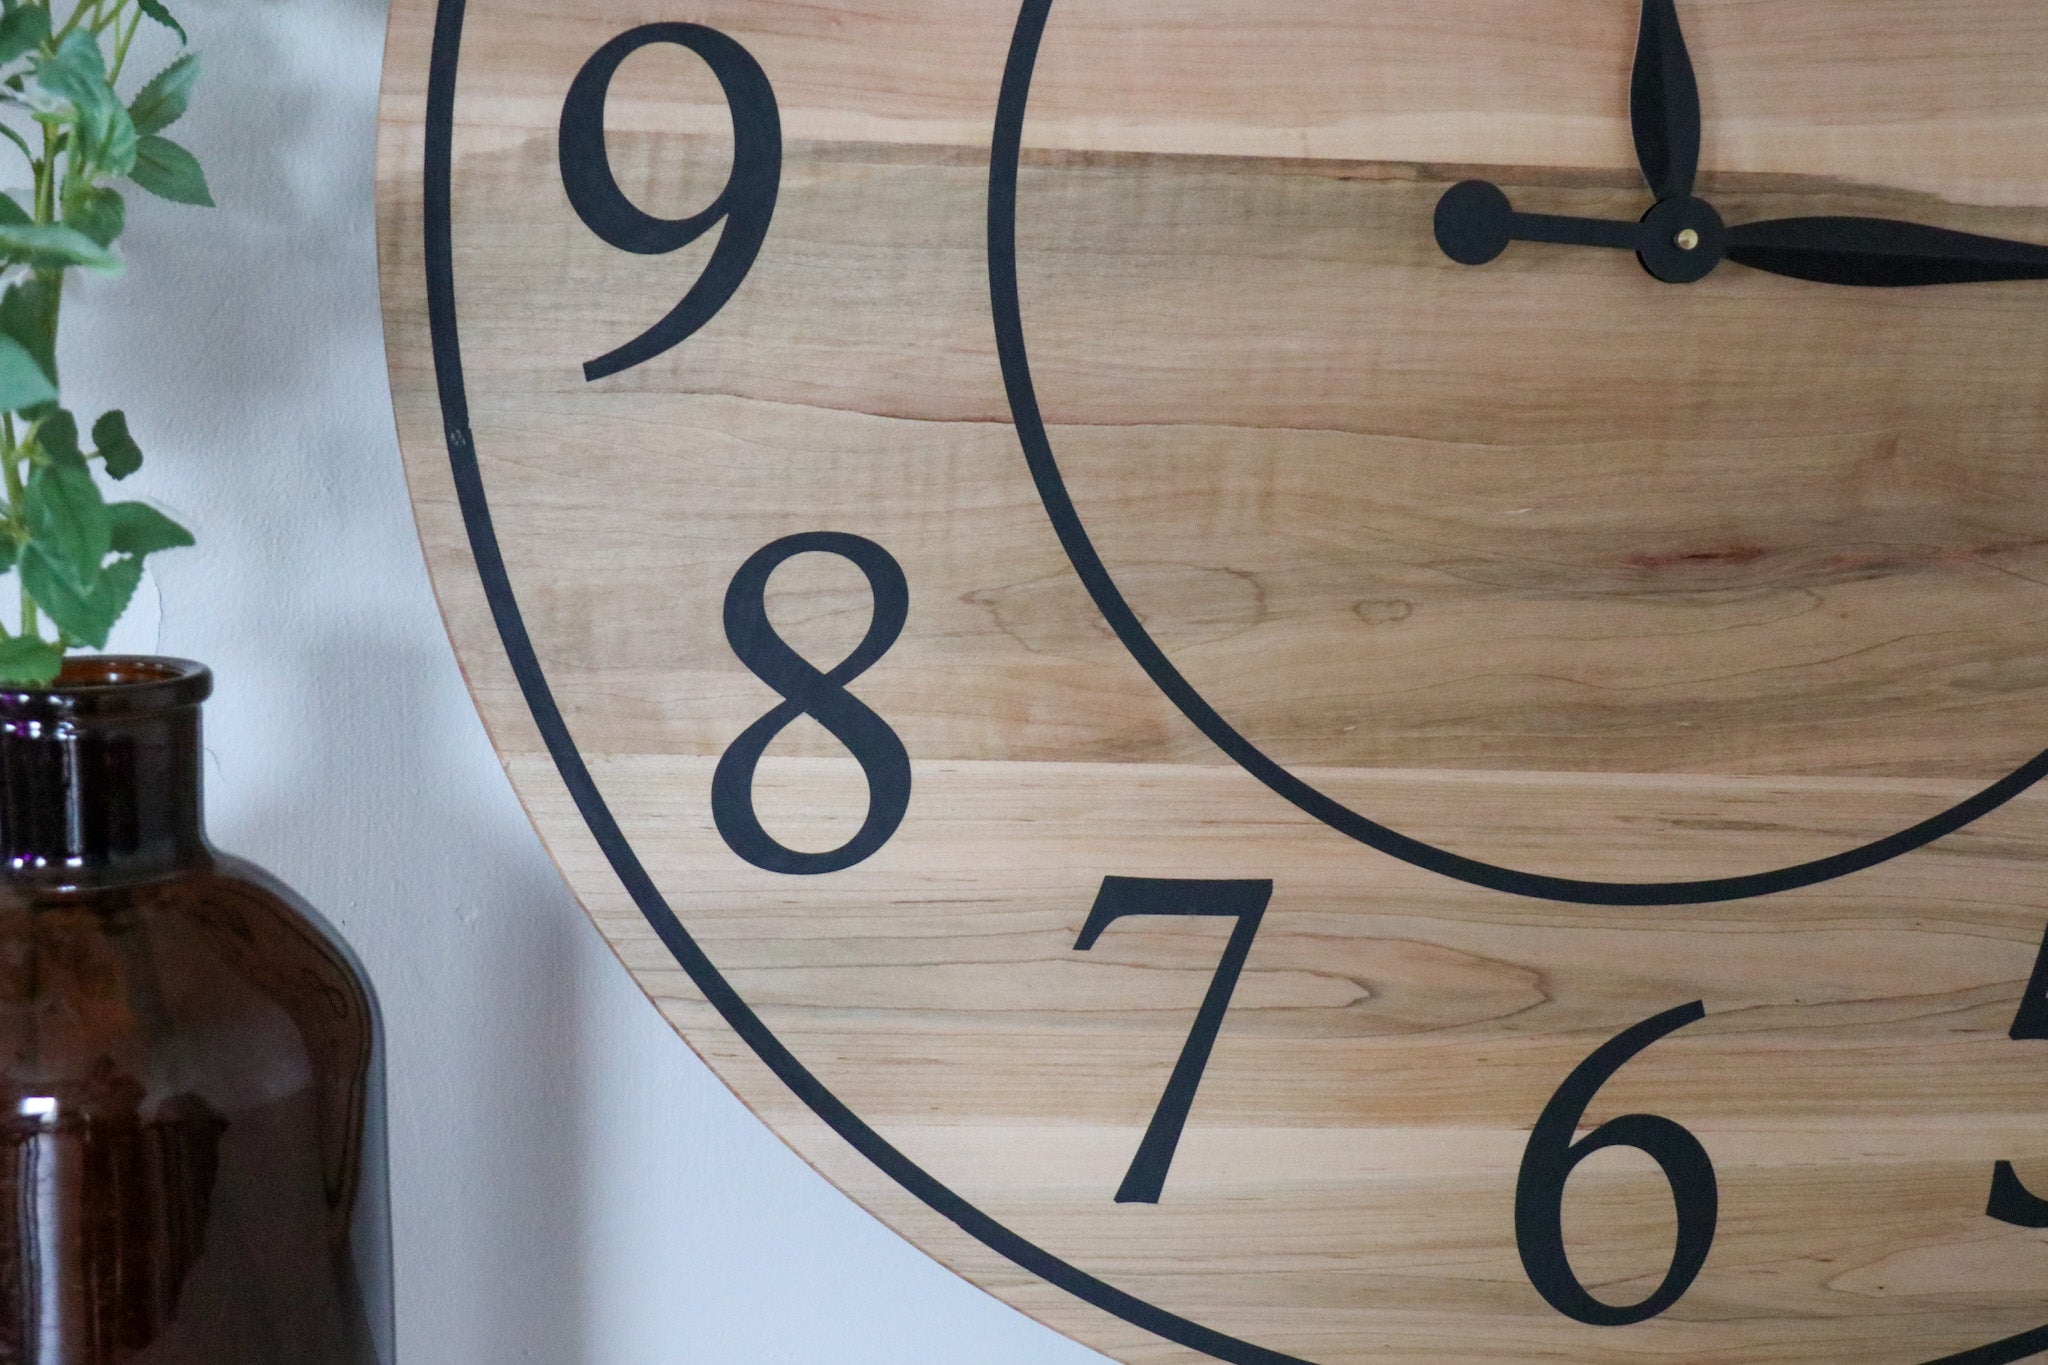 30" Large Solid Soft Maple Wood Clock with Black Roman Numerals (in stock) - Hazel Oak Farms